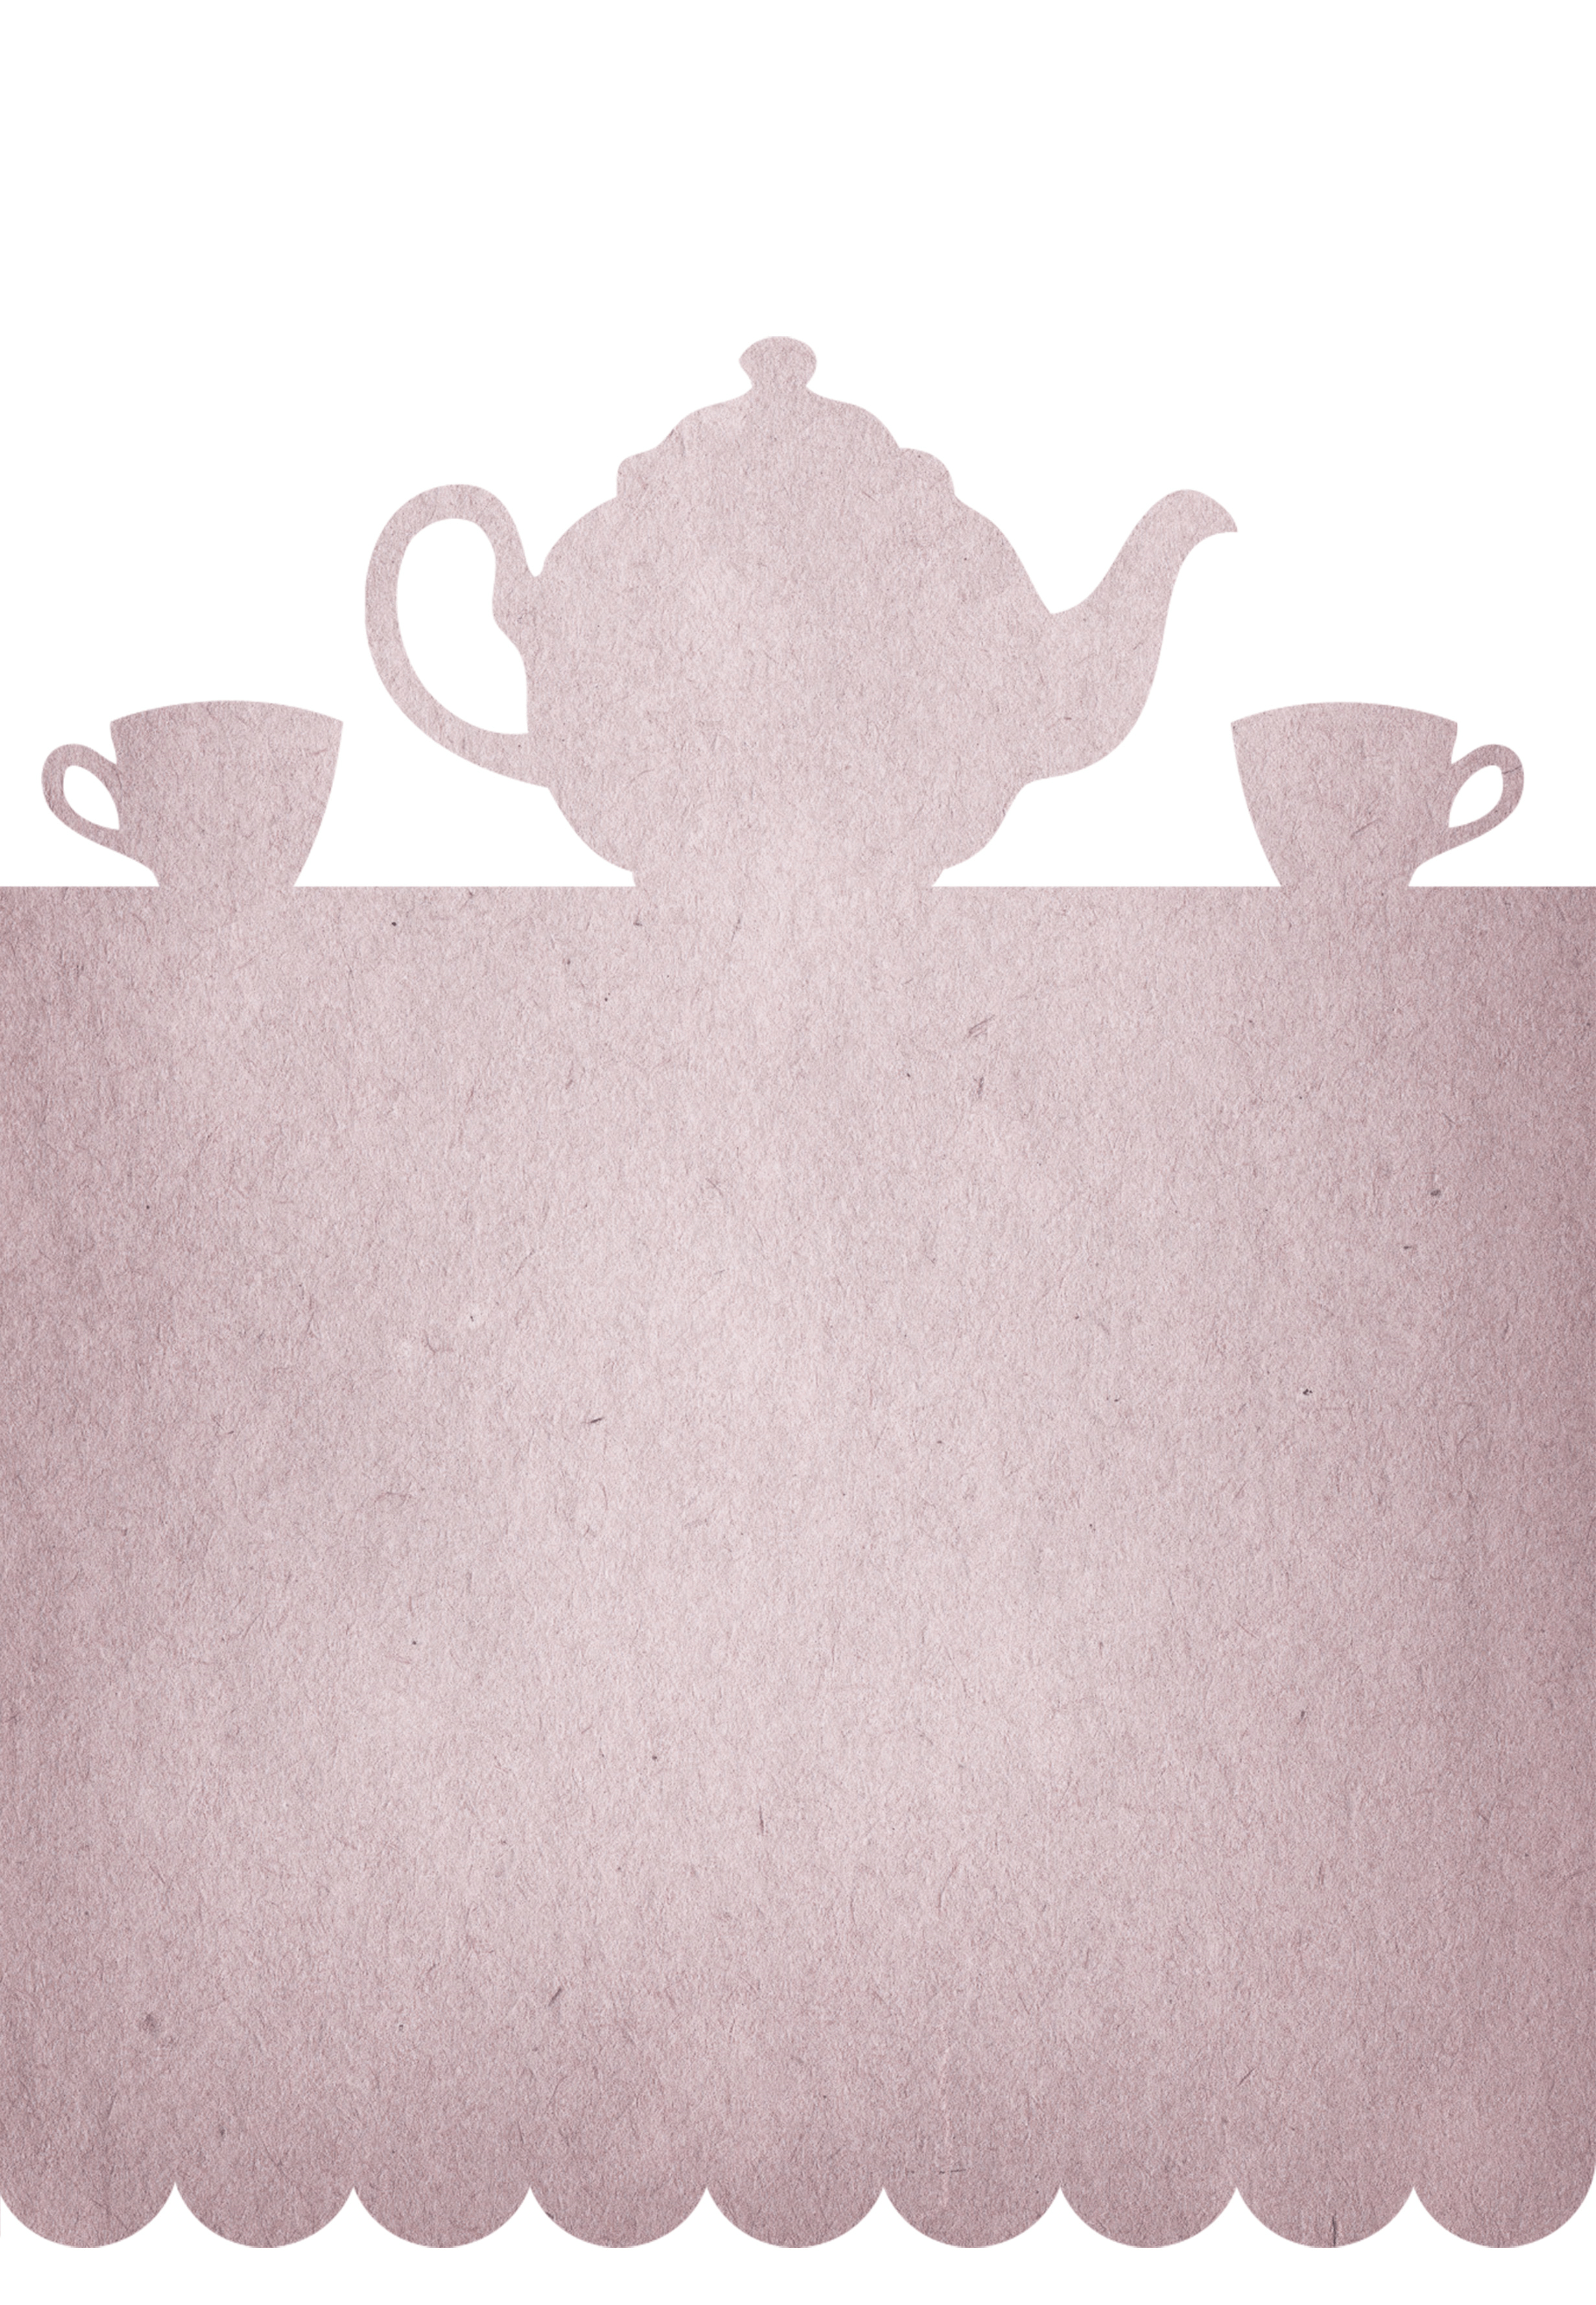 Tea Party Free Printable Party Invitation Template Greetings throughout dimensions 2462 X 3556